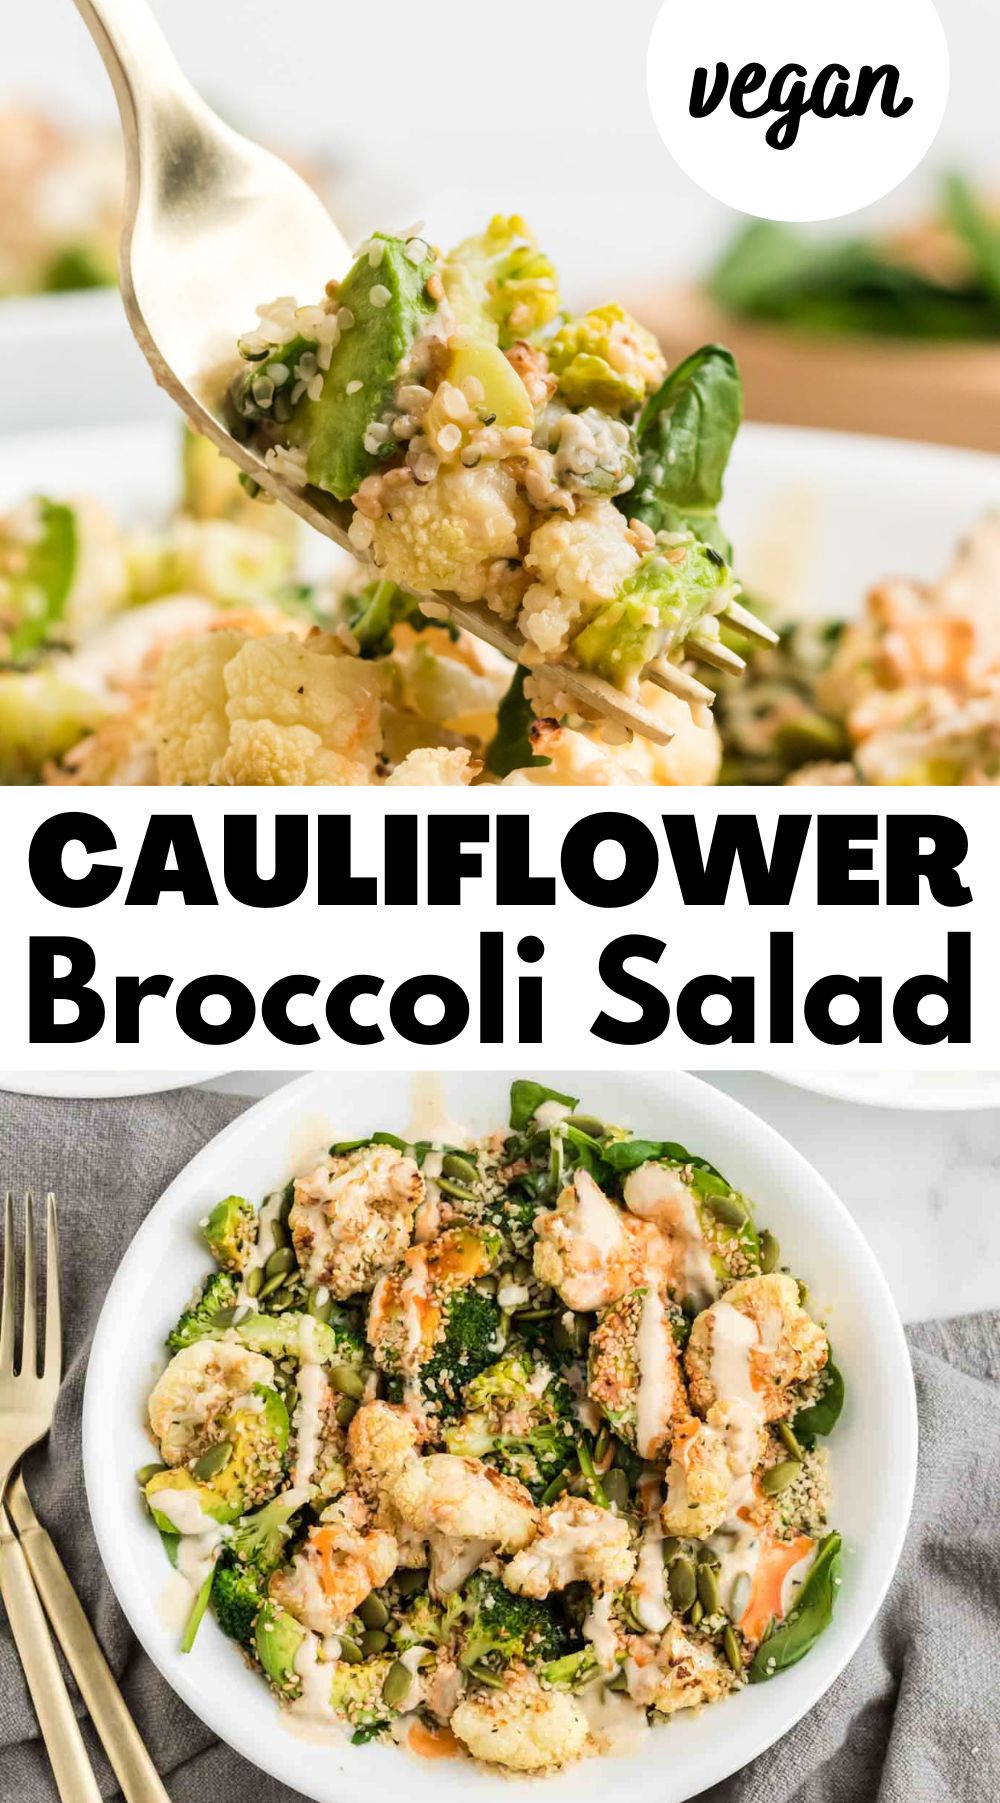 Two images of a bowl of cauliflower salad with broccoli and avocado. A text graphic reads "cauliflower broccoli salad".